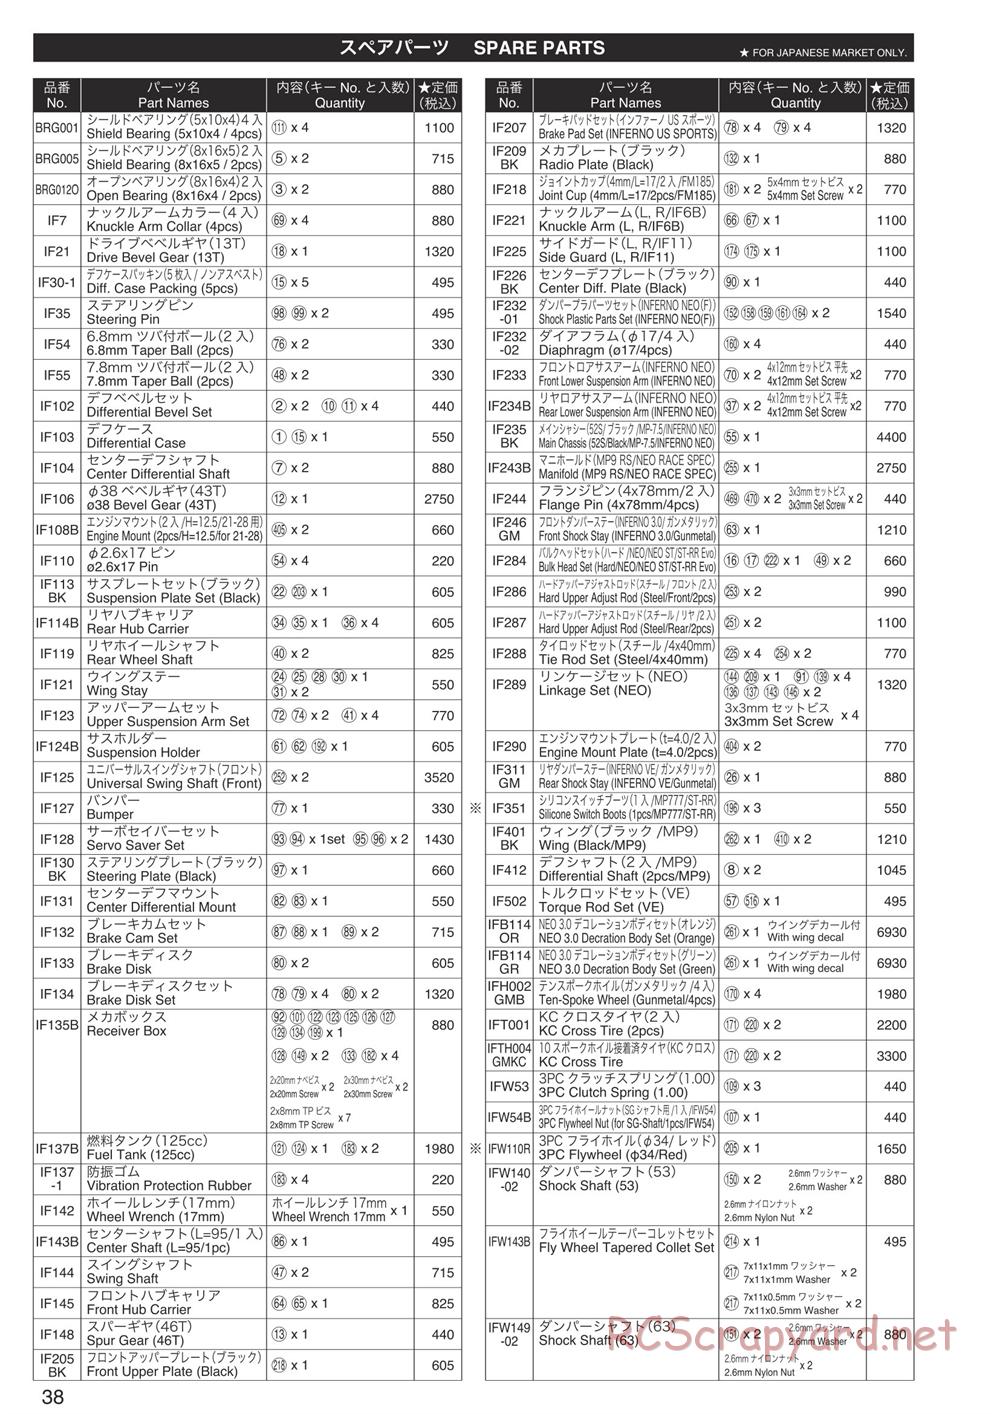 Kyosho - Inferno Neo 3.0 - Parts List - Page 1